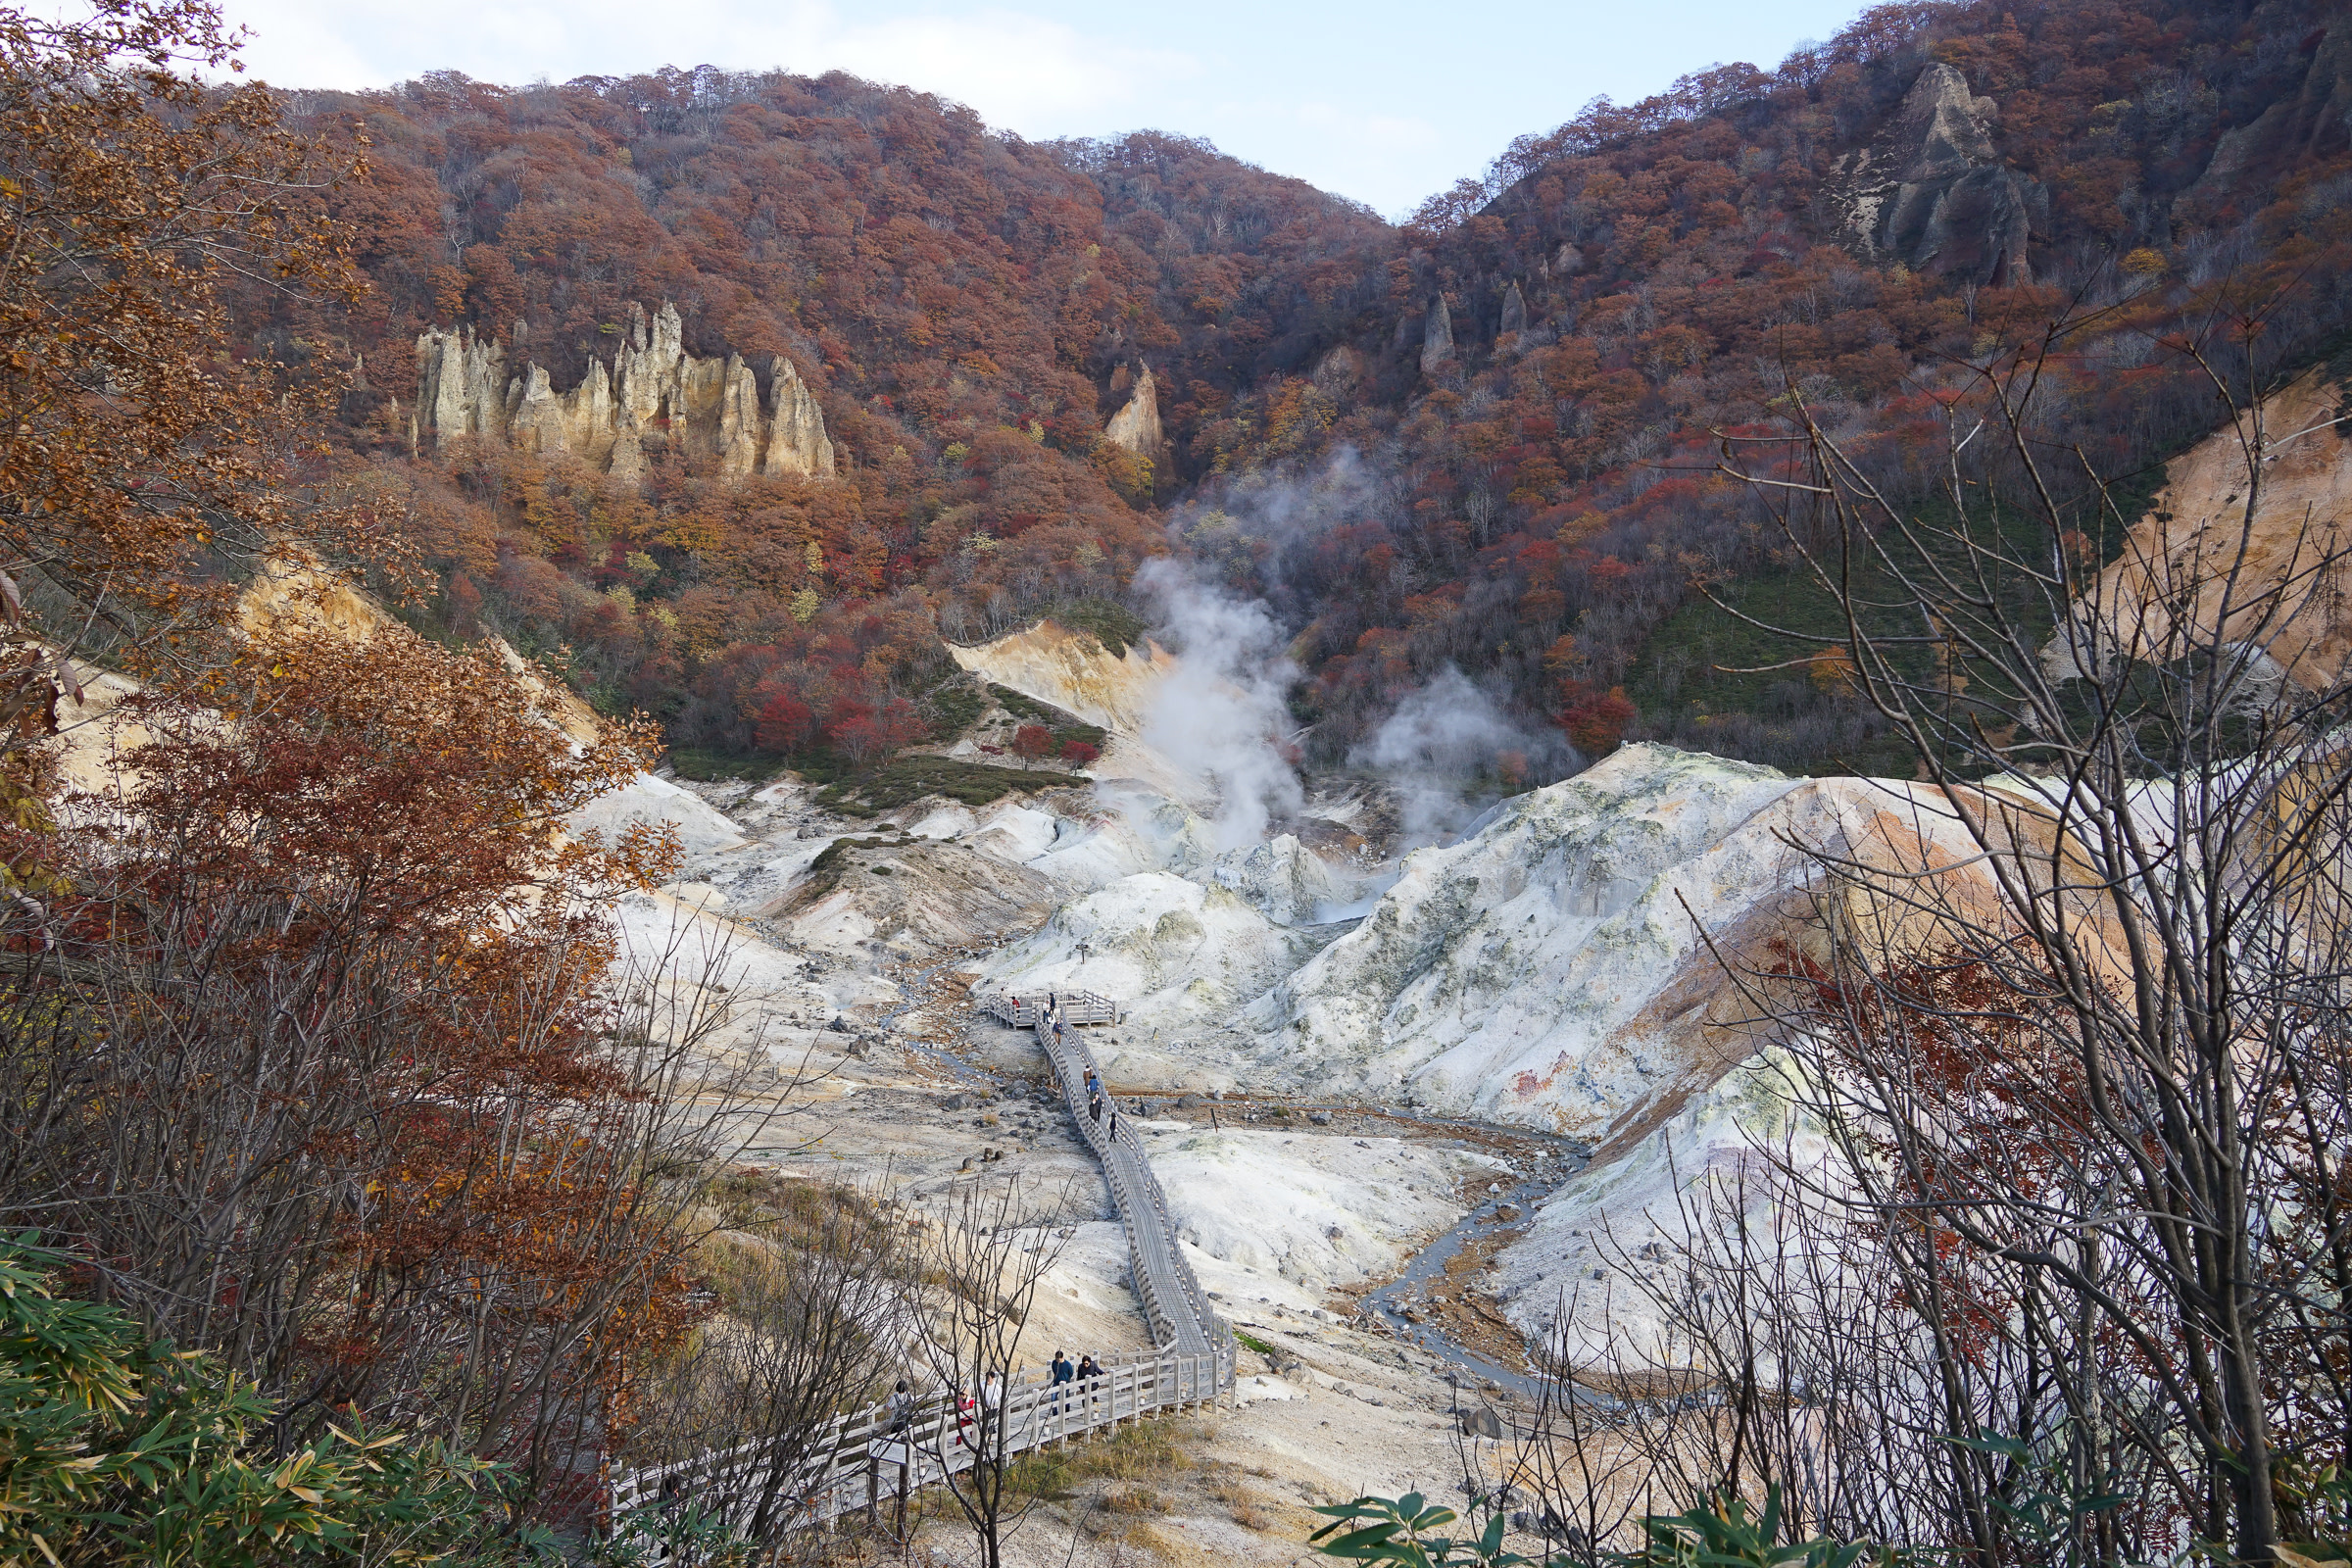 Steam rises from a volcanic landscape, and surrounding trees show off their late-autumn foliage.